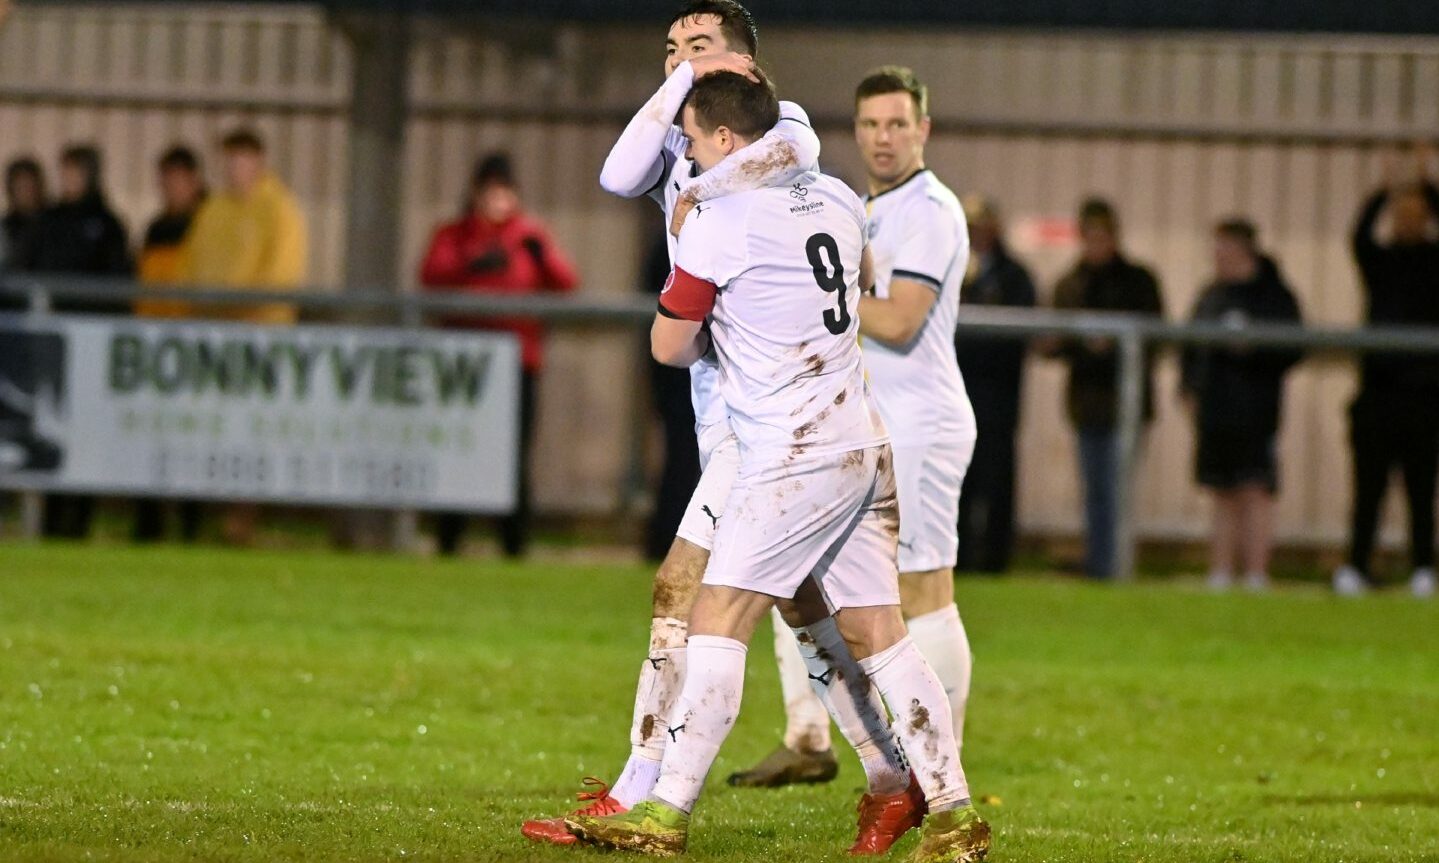 Conor Gethins was on target as Nairn picked up their first home win of the season.